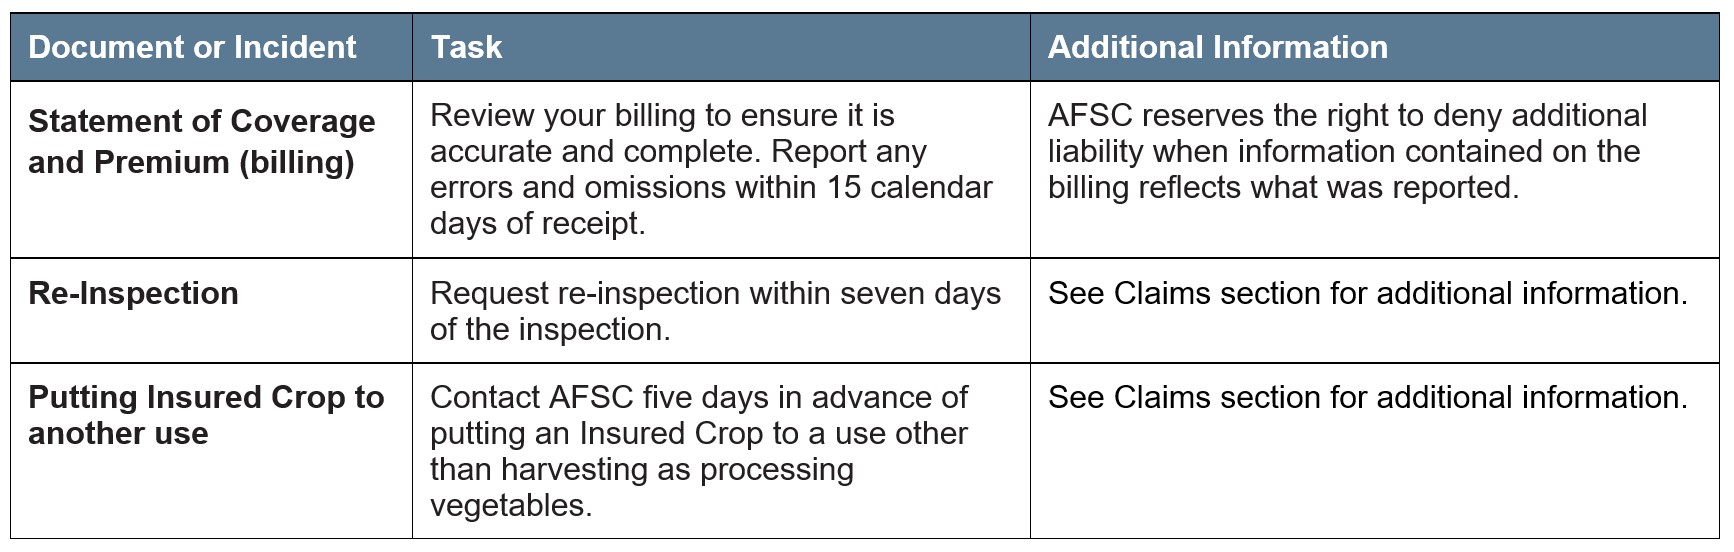 Processing Vegetables Article 4 Other Deadlines. Call AFSC for details